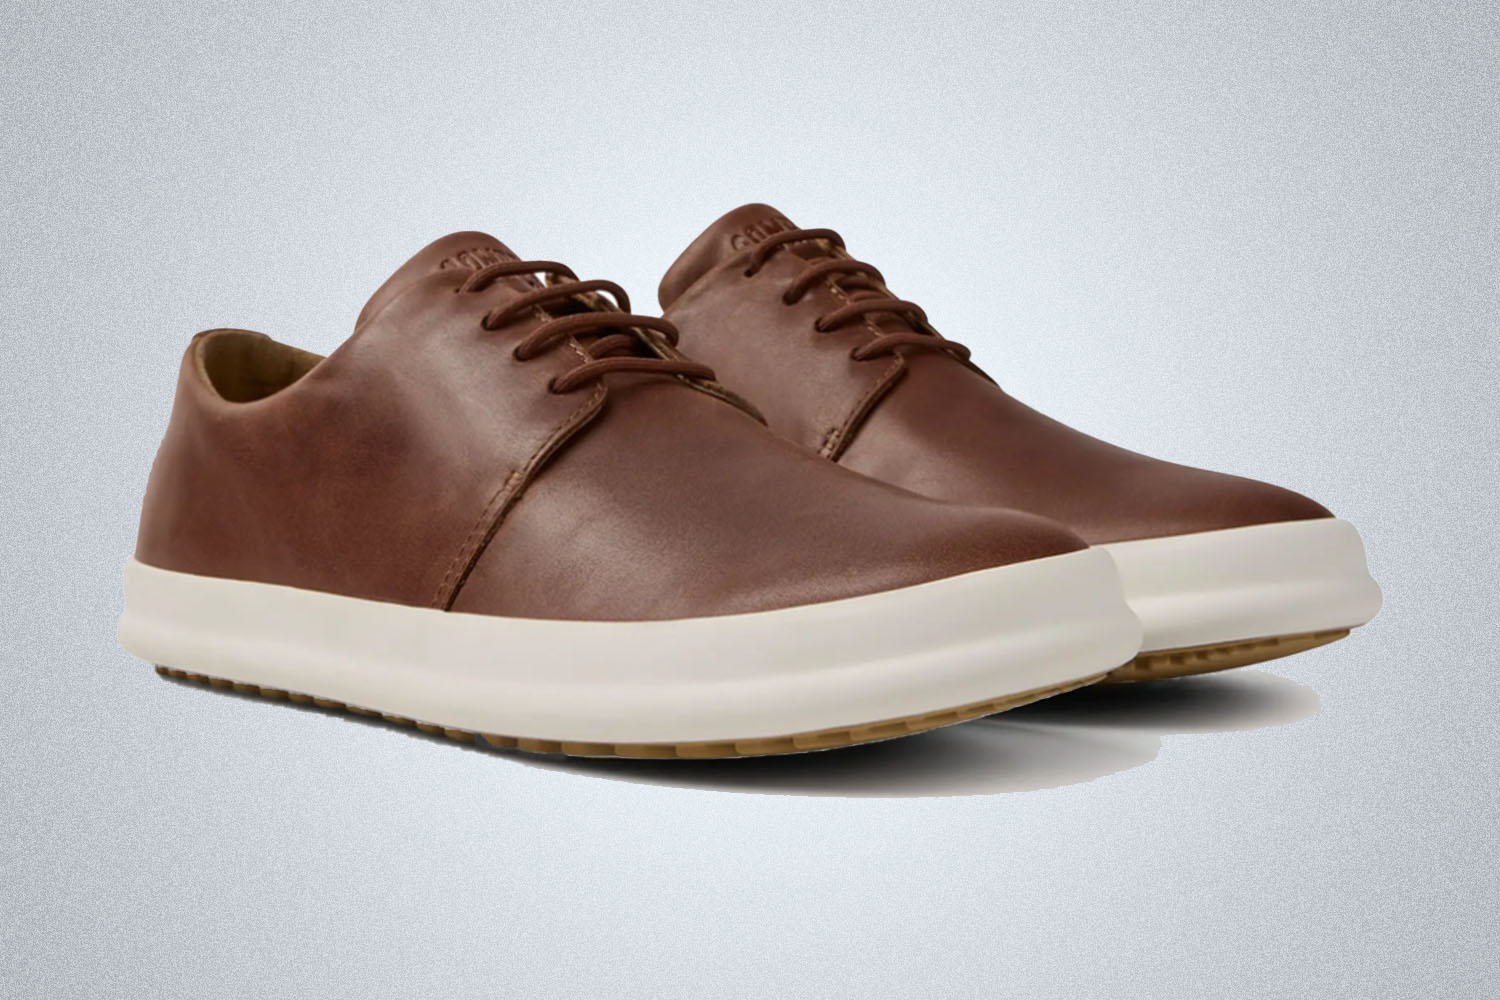 a pair of brown office sneakers from Camper on a grey background